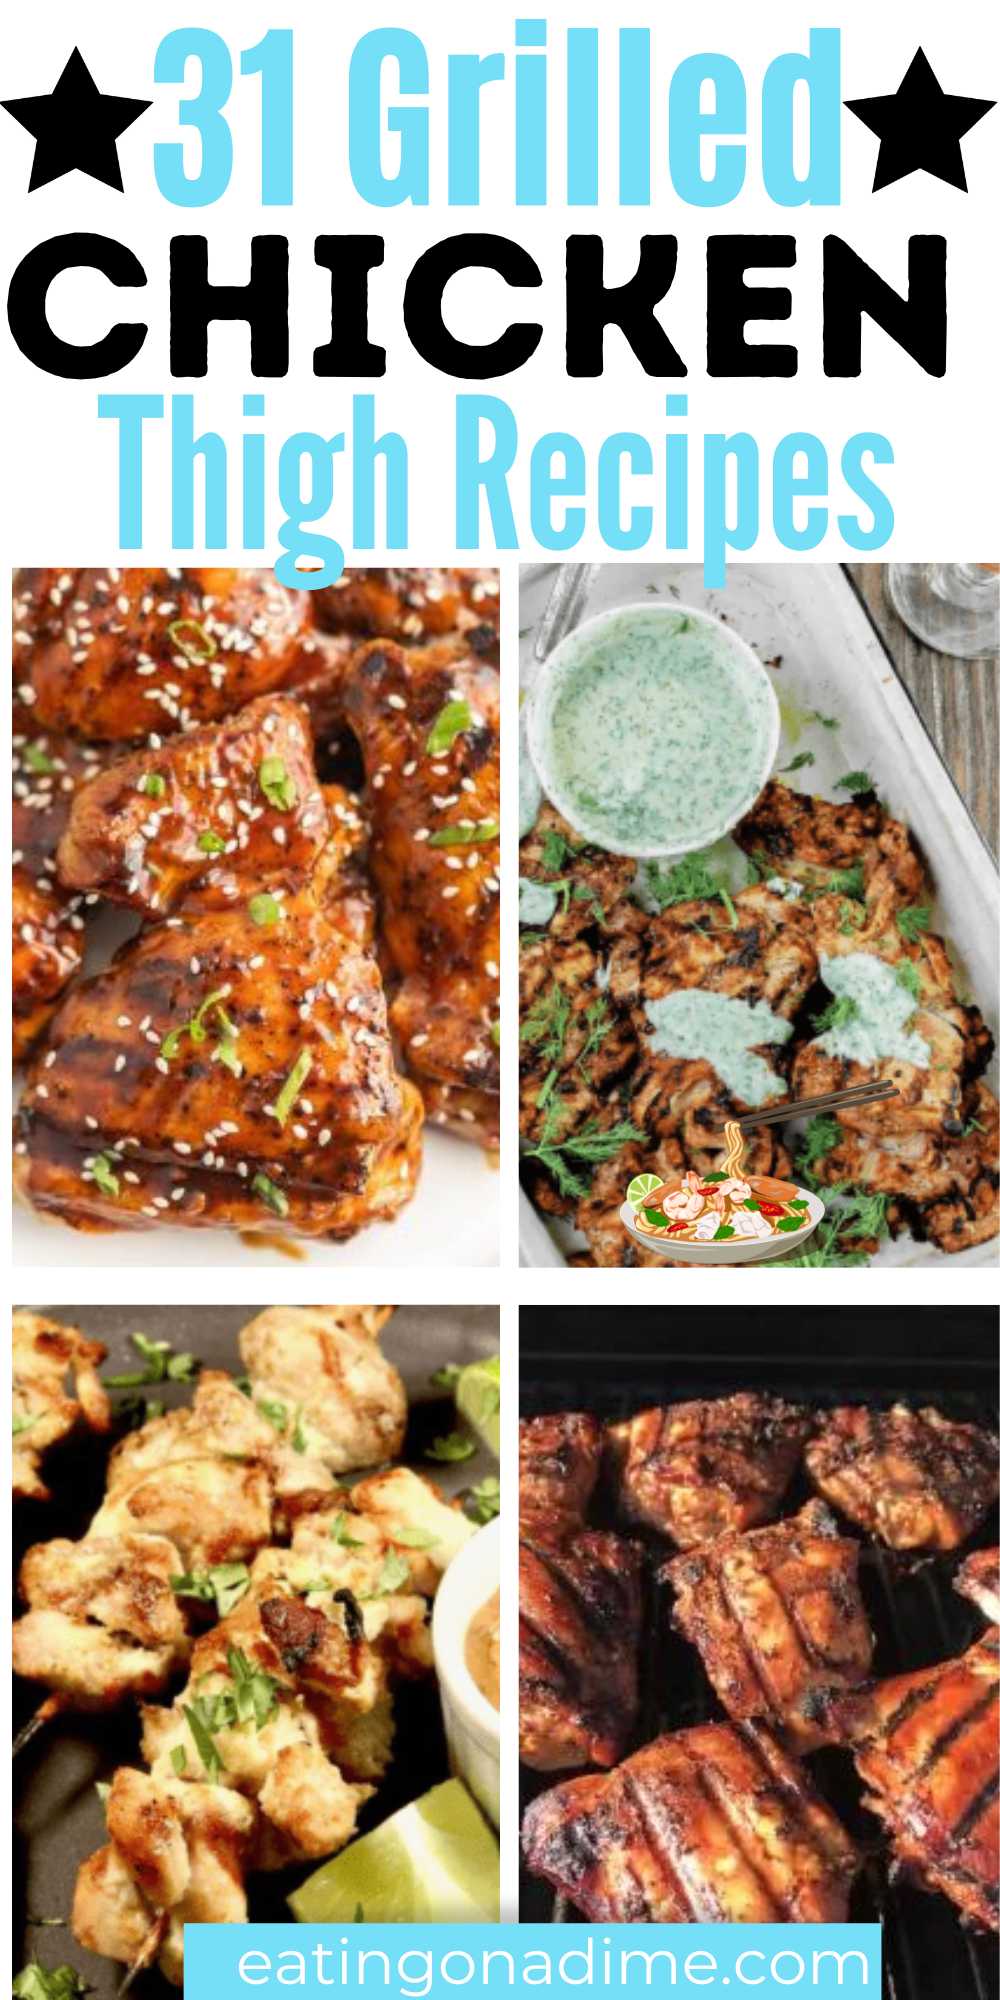 Friends and family will love these grilled chicken thigh recipes. We’ve rounded up 35 easy and delicious chicken thigh recipes for the grill that include bone in, boneless skinless and an assortment of easy marinade recipes. These marinated chicken recipes are juicy, tender, healthy and flavorful. #eatingonadime #grilledchickenthighrecipes #grilledchicken